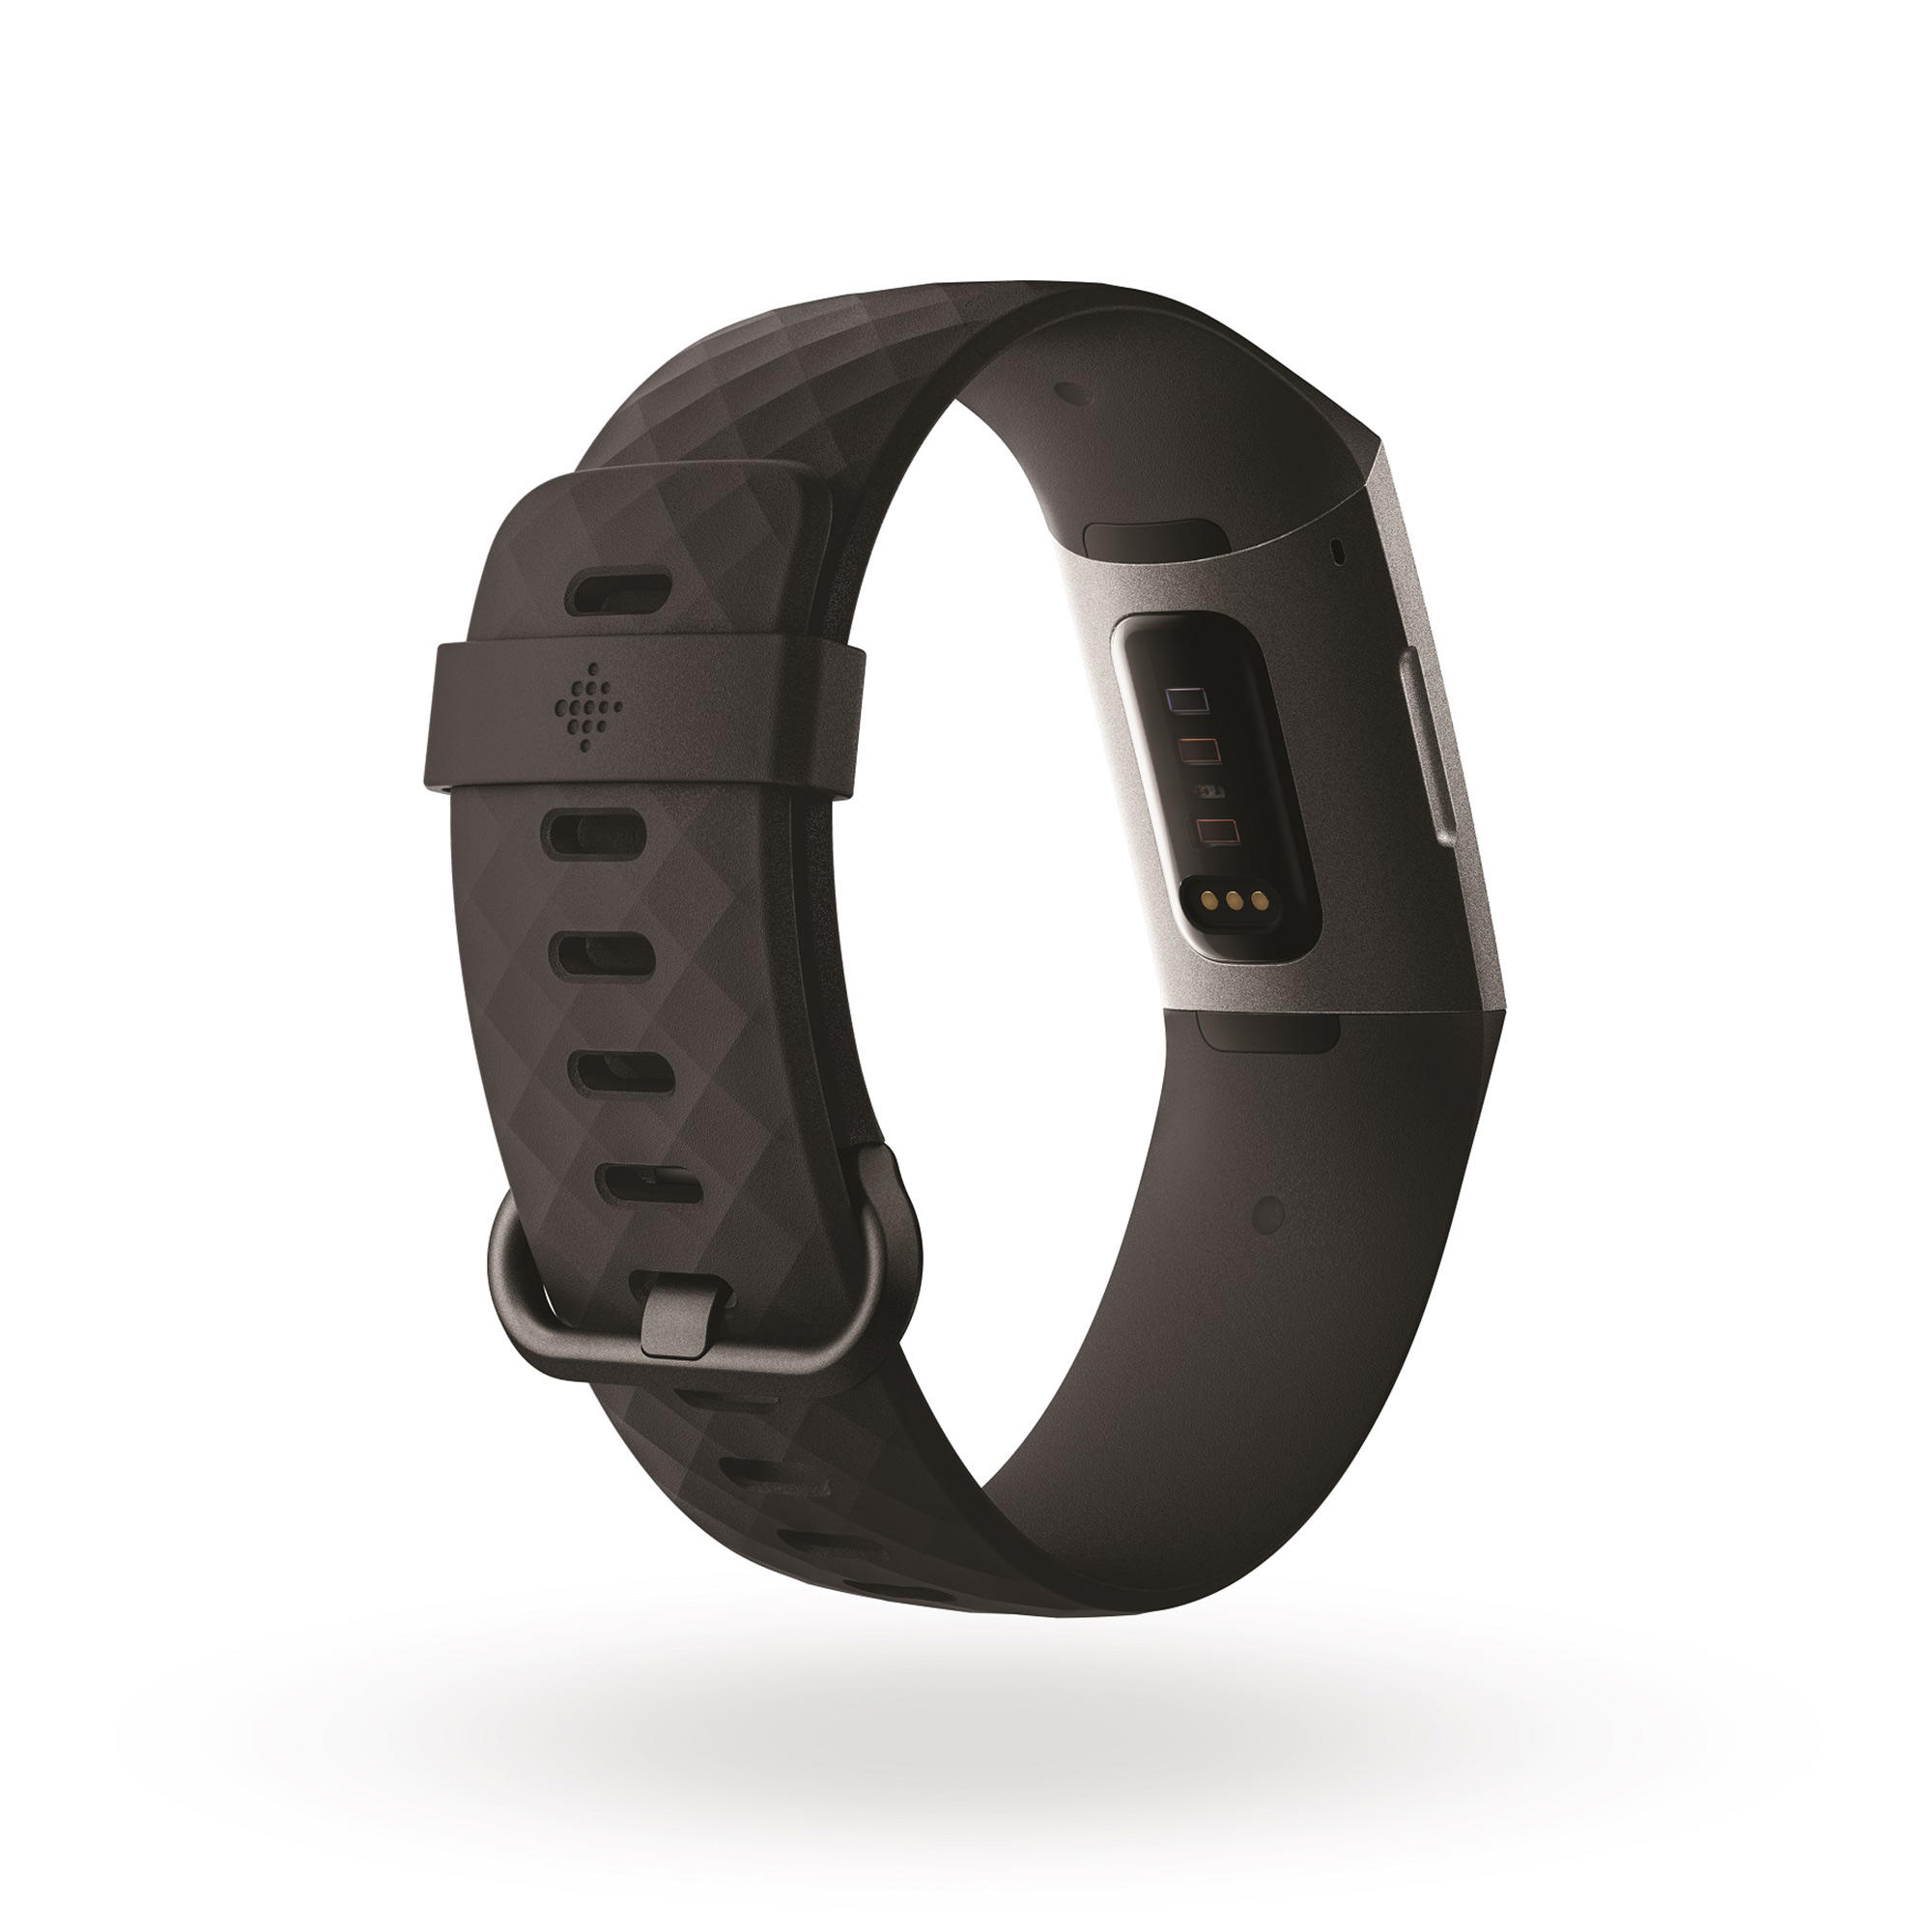 decathlon fitbit charge 2